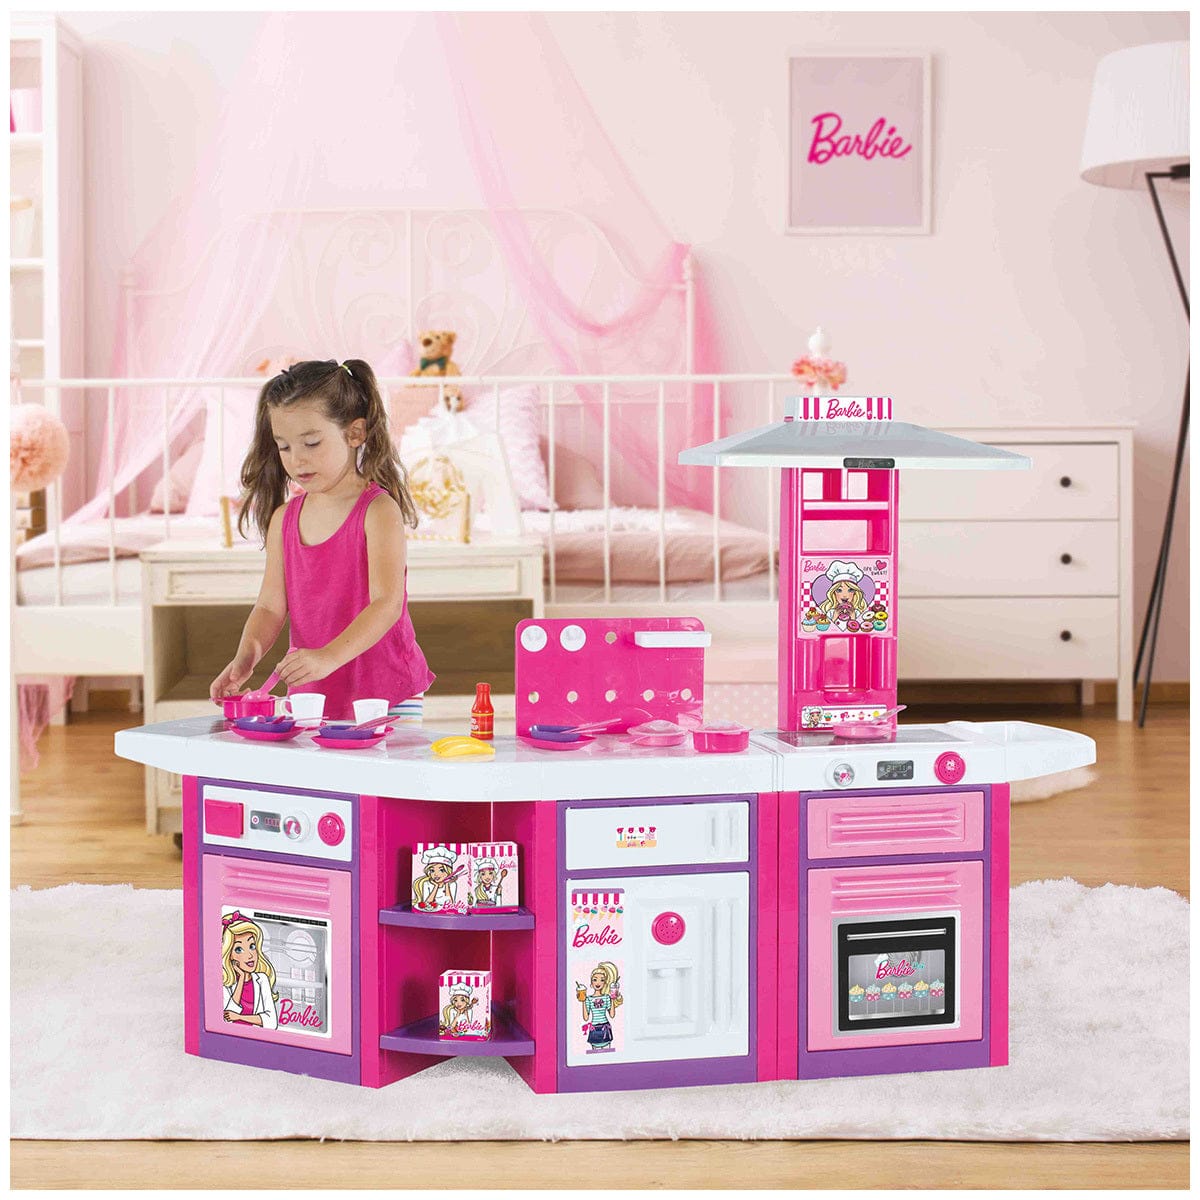 Barbie Kitchen Set: The Barbie Kitchen Playset is larger than life and includes multiple modular components that all fit together to create your dream Barbie kitchen - 1614